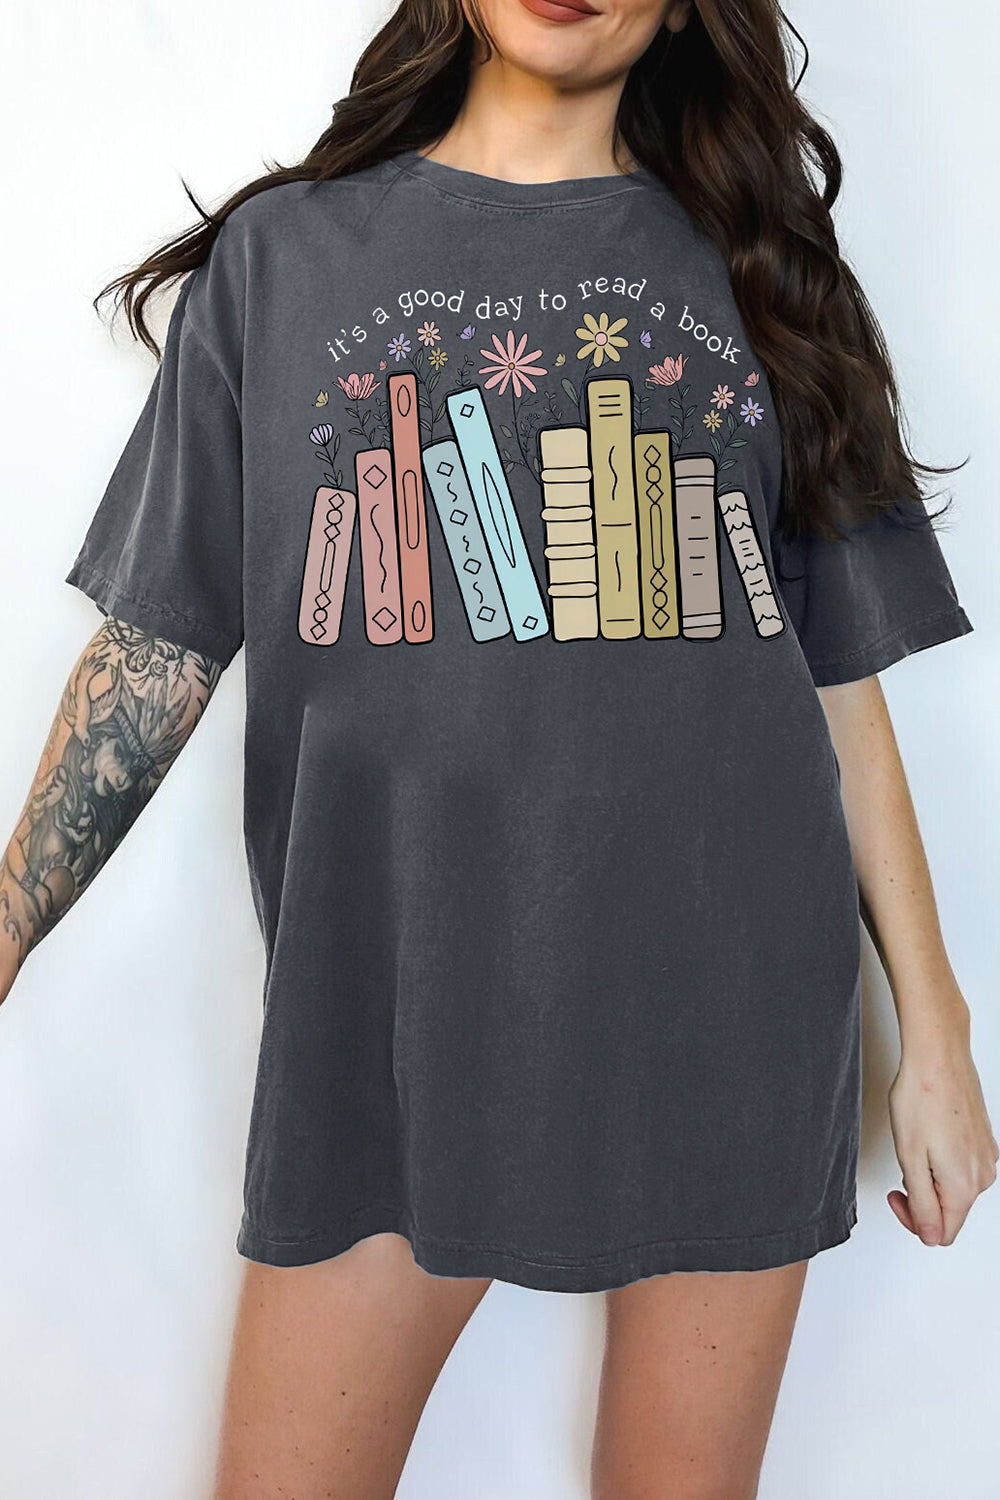 It's A Good Day To Read A Book Tee For Women